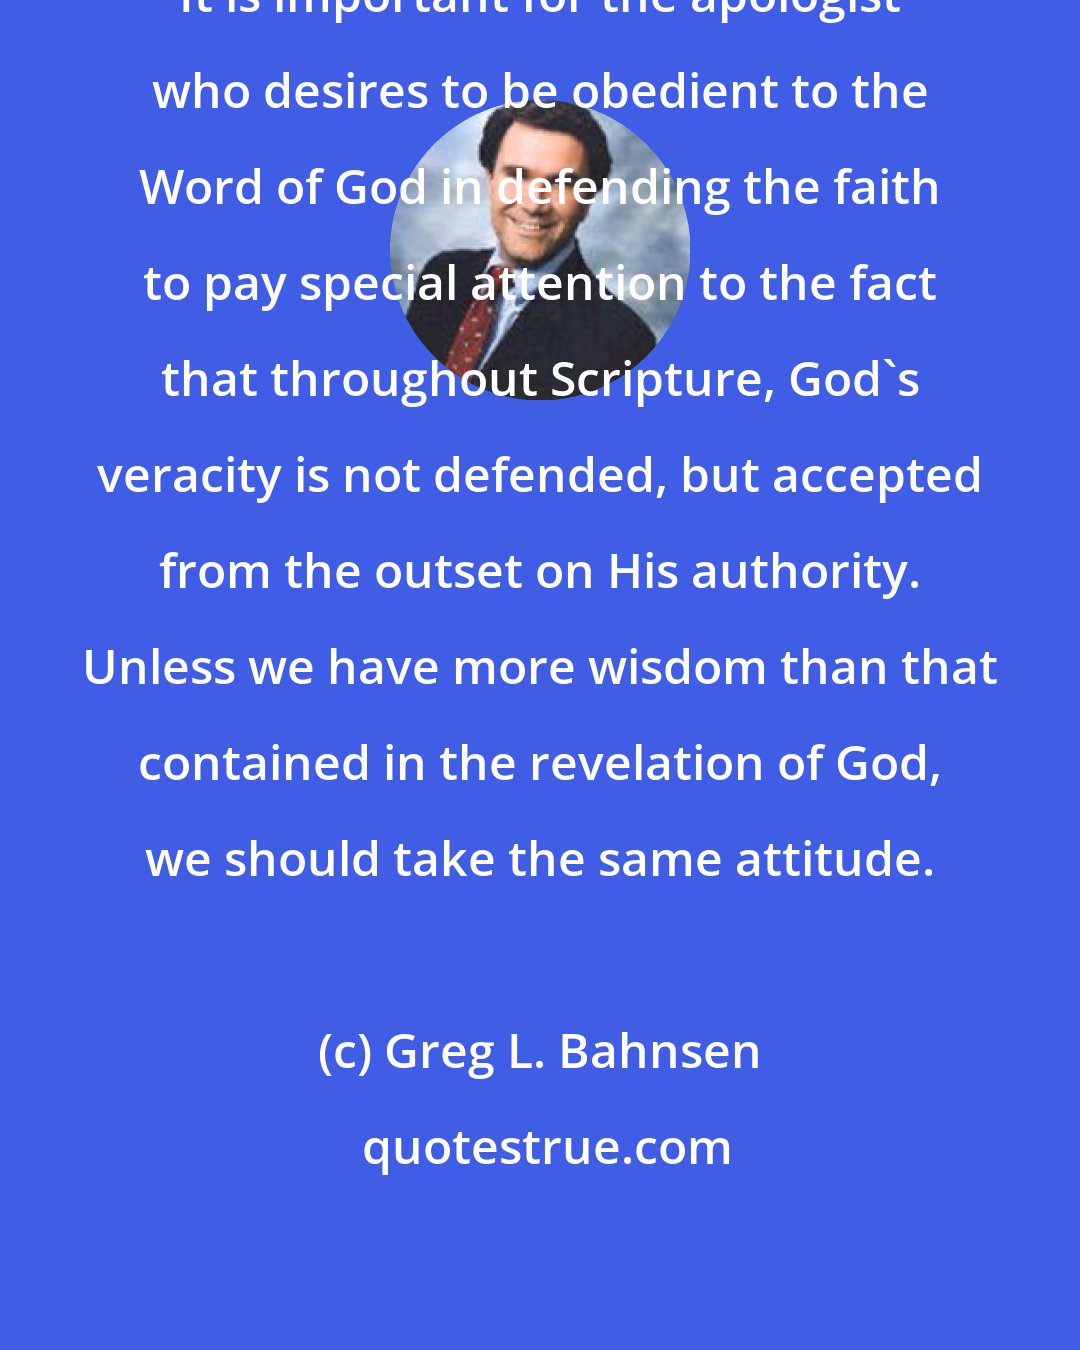 Greg L. Bahnsen: It is important for the apologist who desires to be obedient to the Word of God in defending the faith to pay special attention to the fact that throughout Scripture, God's veracity is not defended, but accepted from the outset on His authority. Unless we have more wisdom than that contained in the revelation of God, we should take the same attitude.